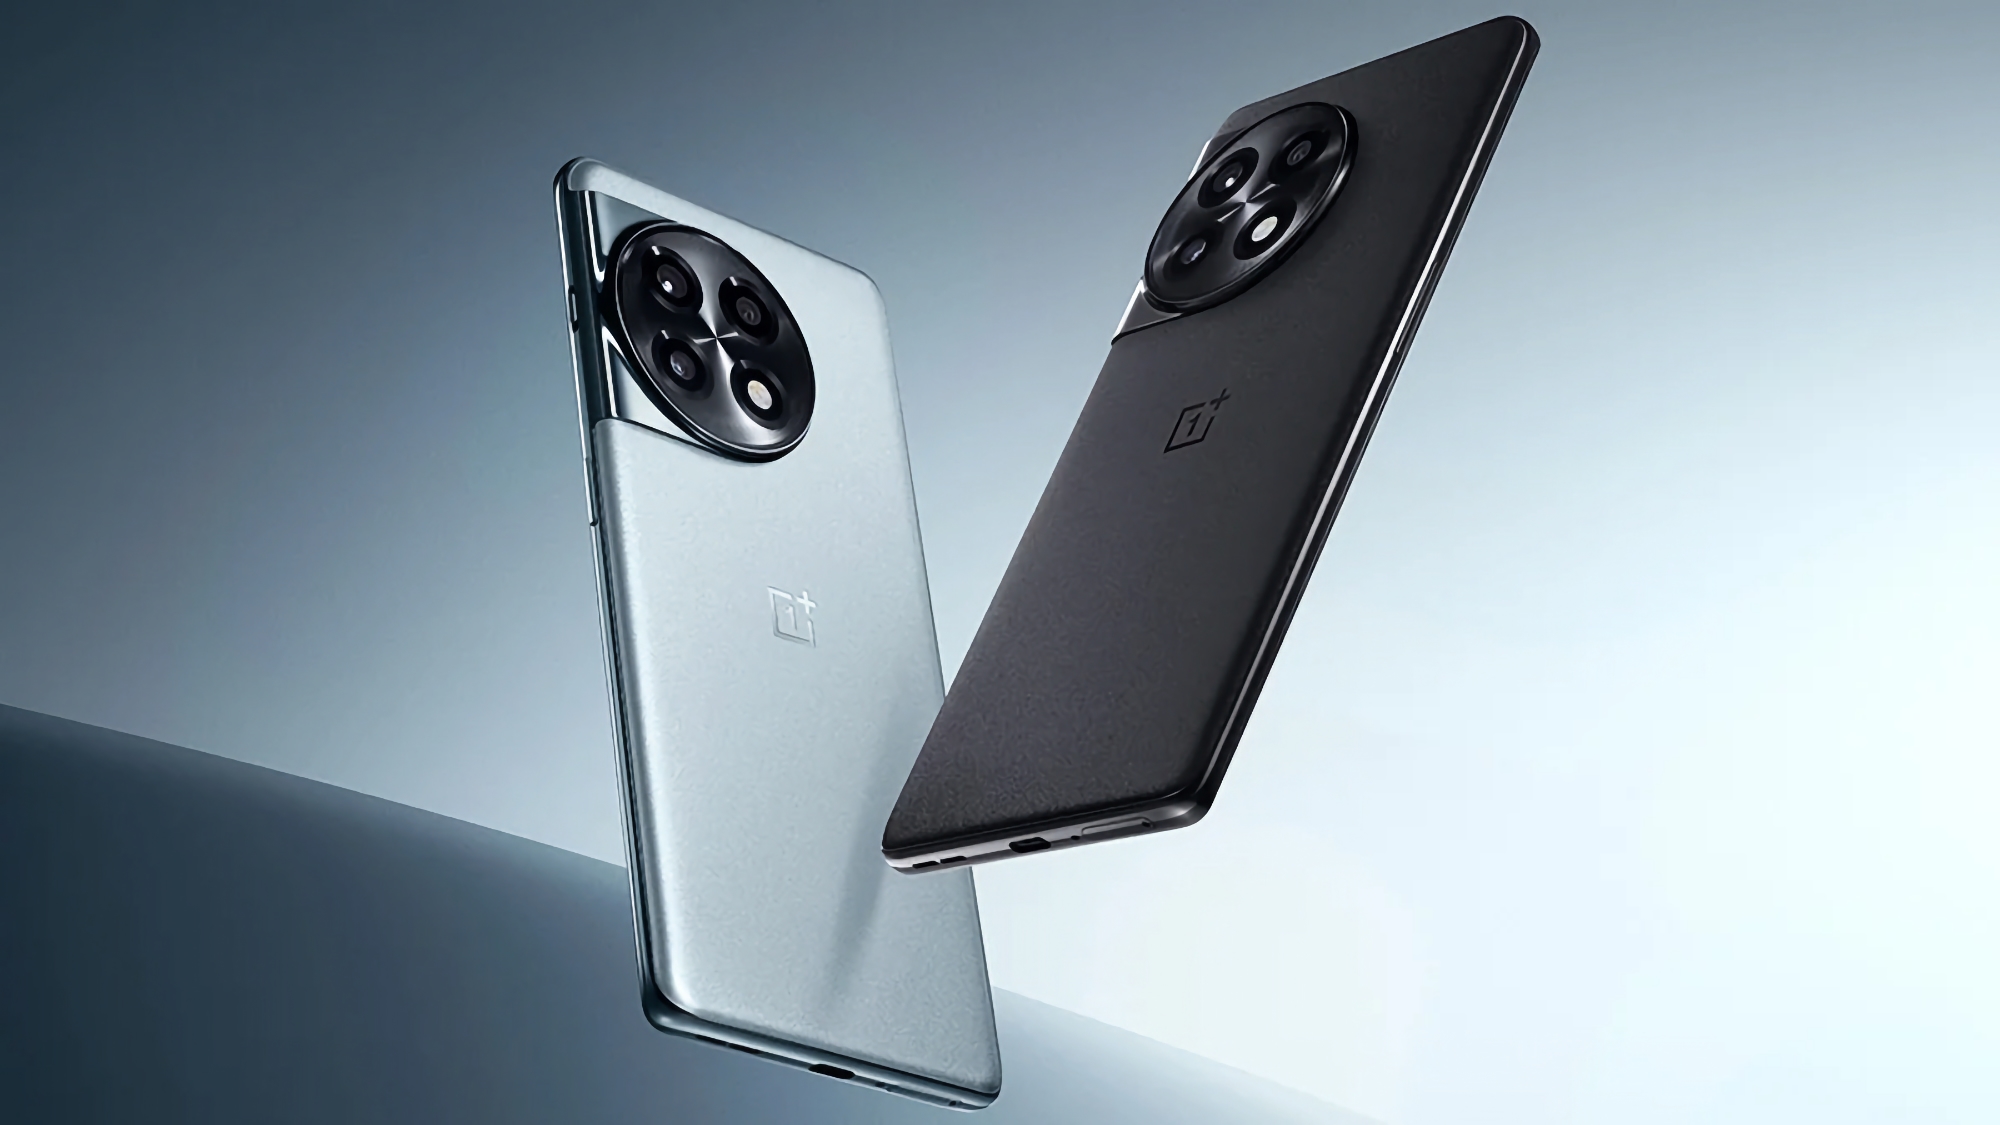 OnePlus prepares to launch a new version of the OnePlus Ace 2, with the smartphone getting a MediaTek processor instead of Qualcomm